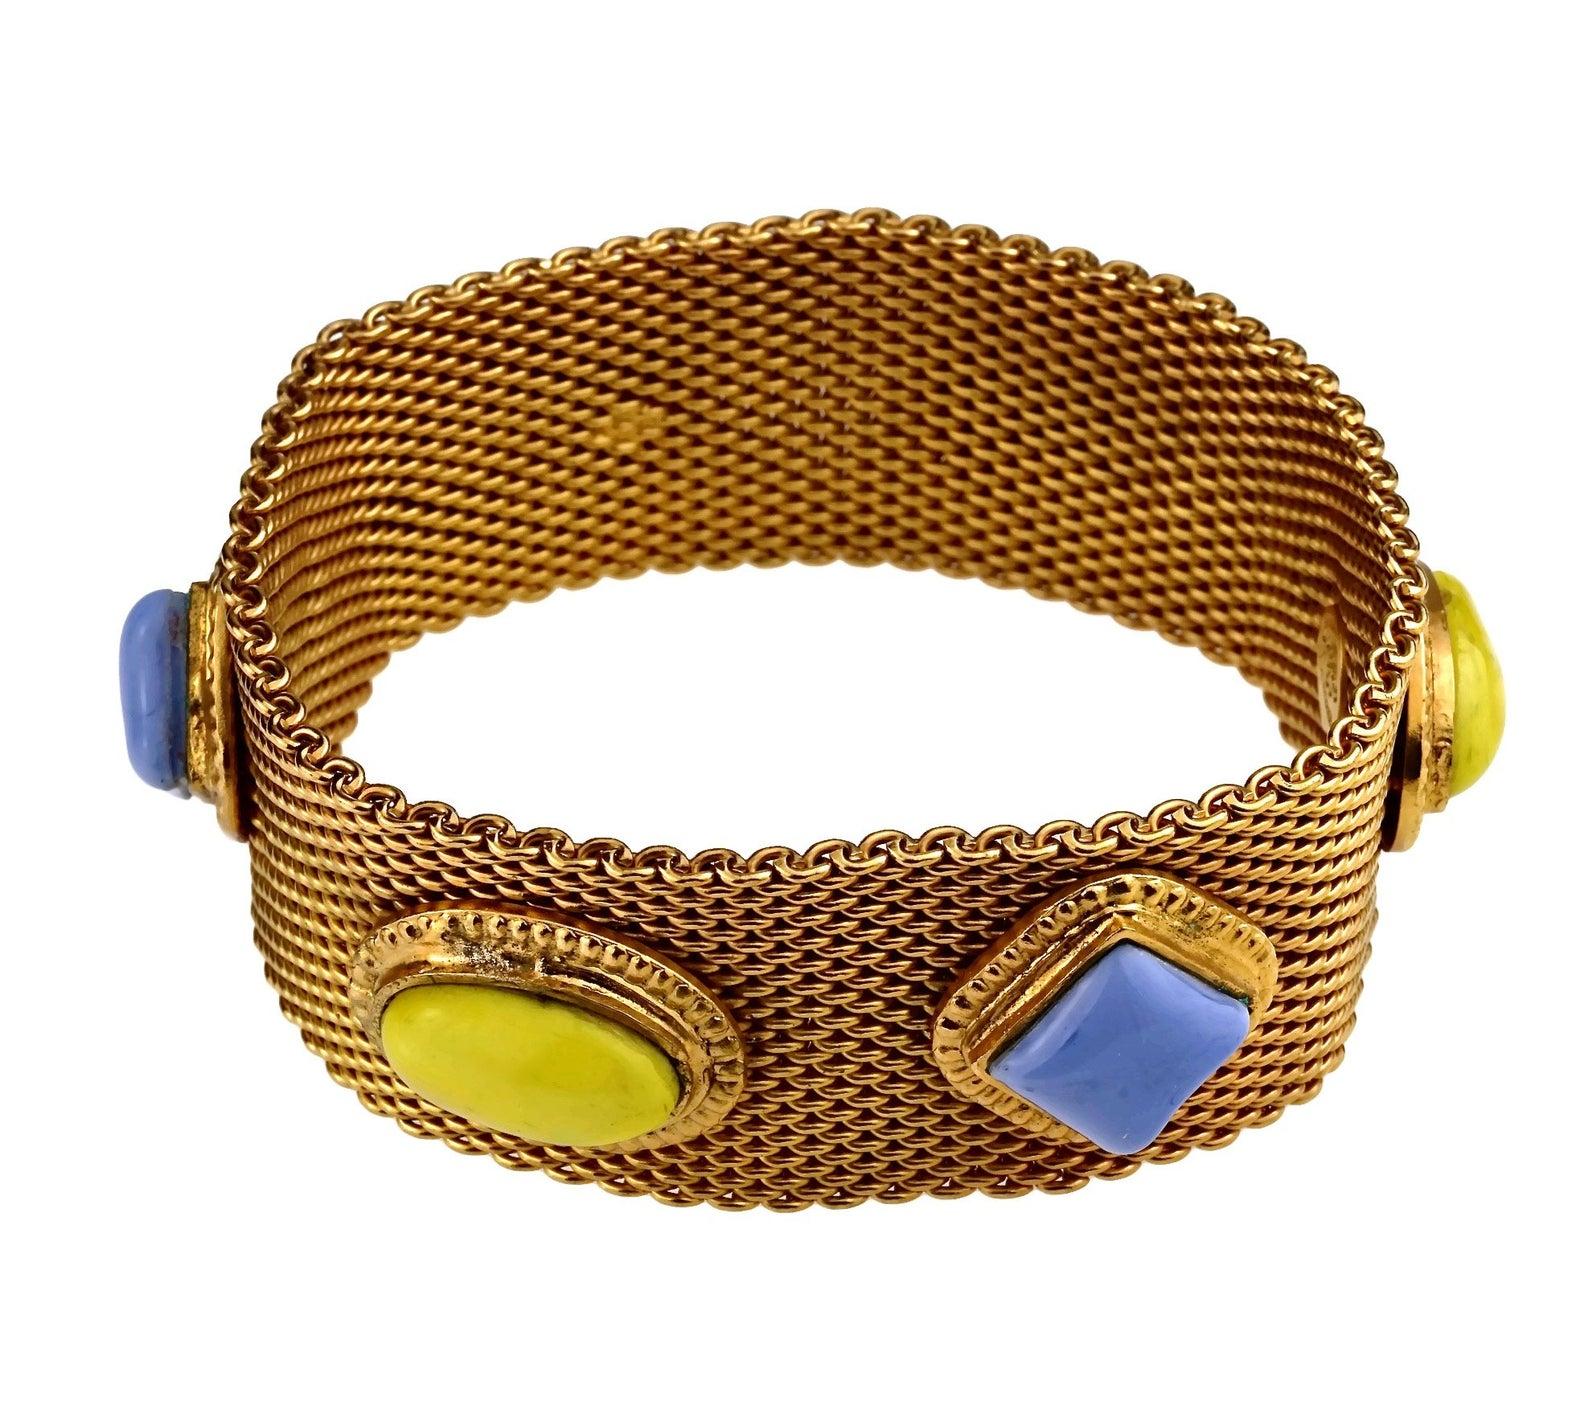 Vintage CHANEL Mesh Pop Colour Glass Paste Cuff Bracelet

Measurements:
Height: 1.14 inches (2.9 cm)
Inner Circumference: 7.87 inches (20 cm)

Features:
- 100% Authentic CHANEL.
- Mesh bracelet accentuated with blue and yellow pop coloured glass